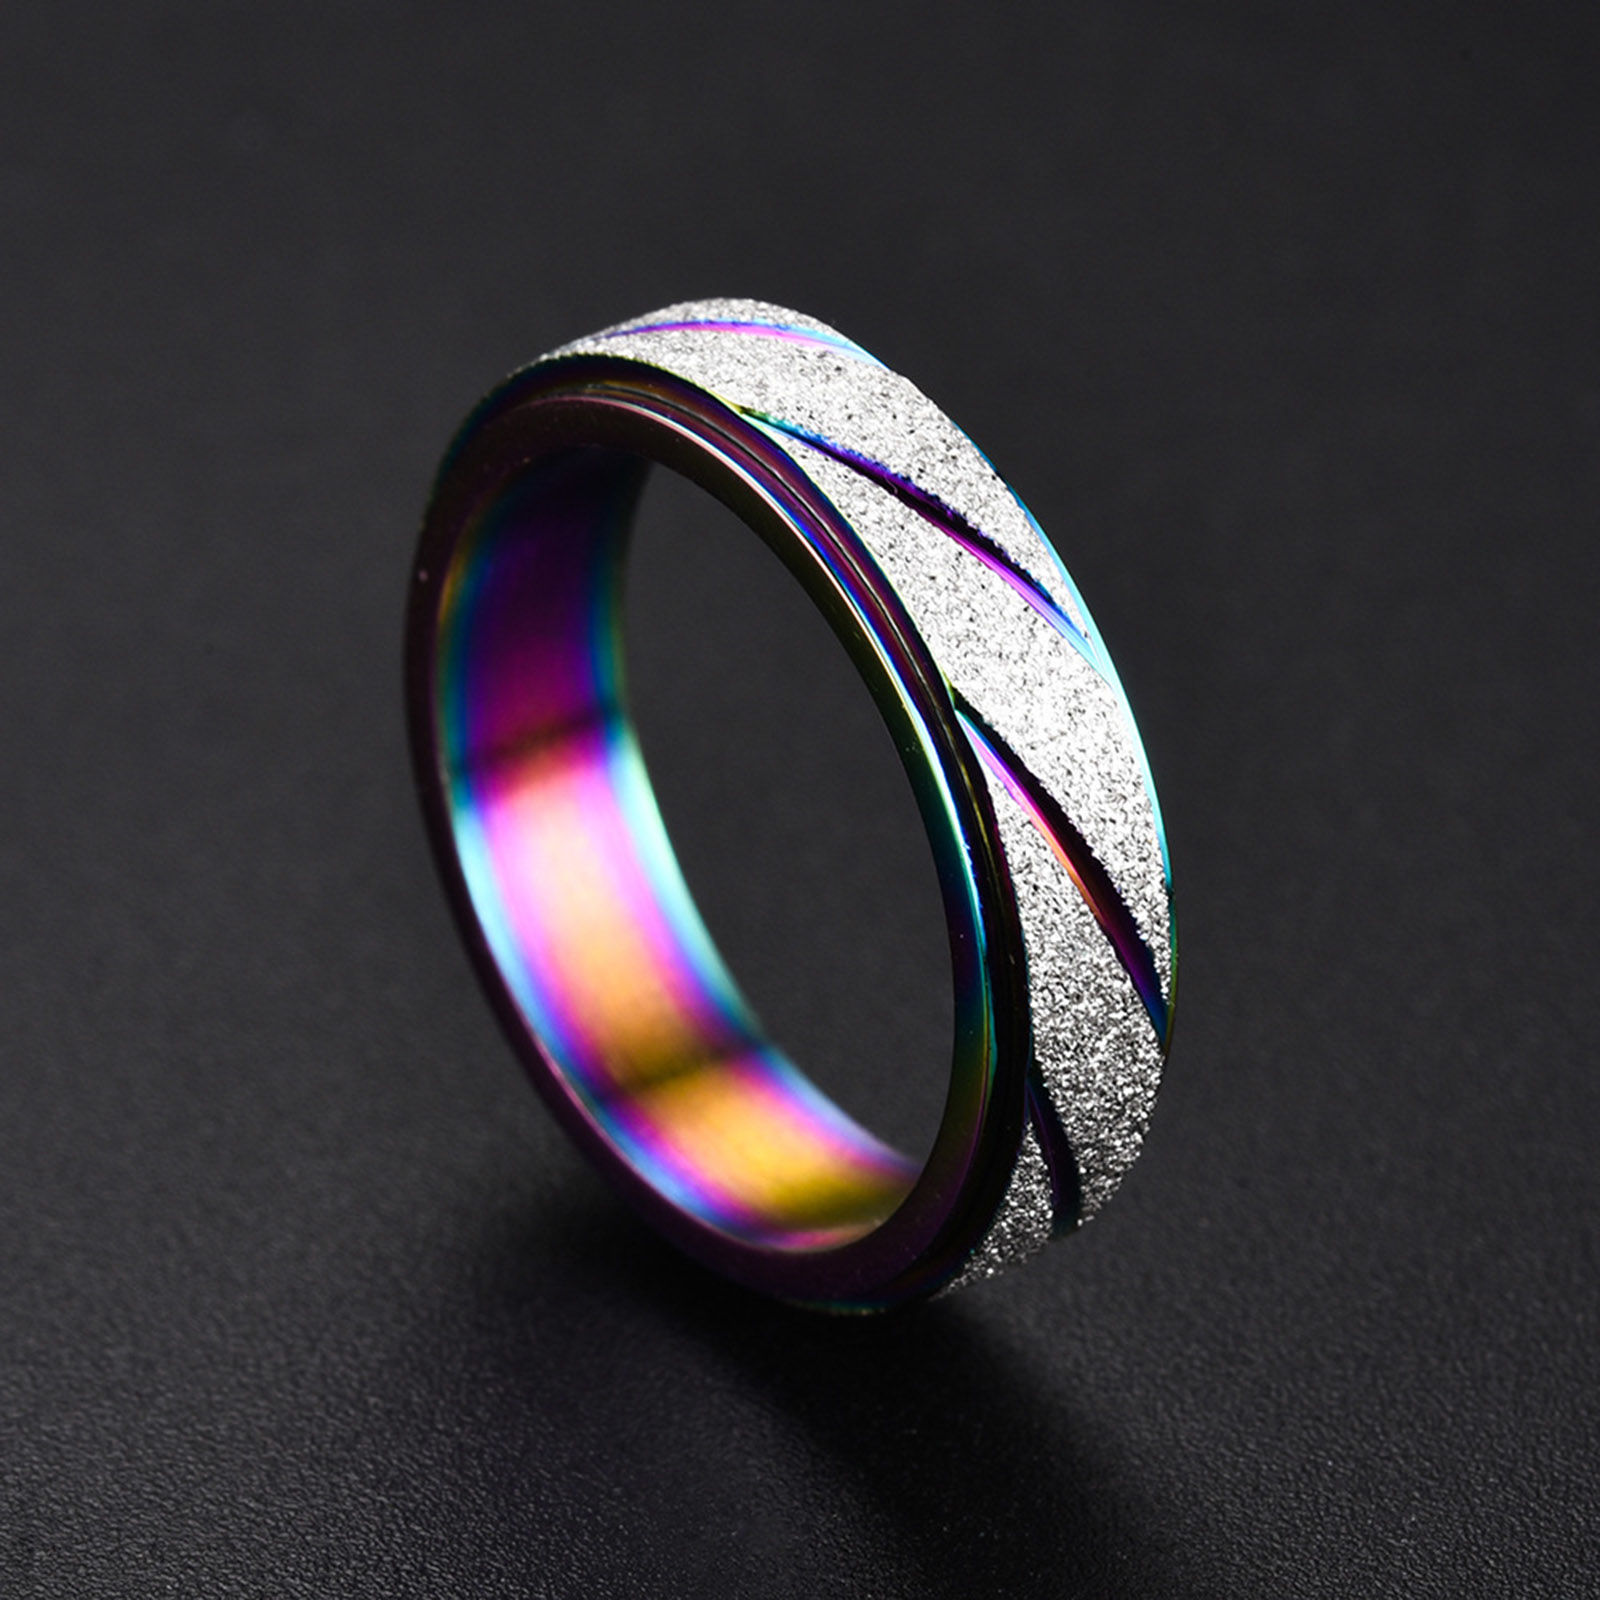 Picture of Stainless Steel Unadjustable Stress Relieving Anxiety Ring Fidget Spinner Rings Glitter Finish Rotatable Round